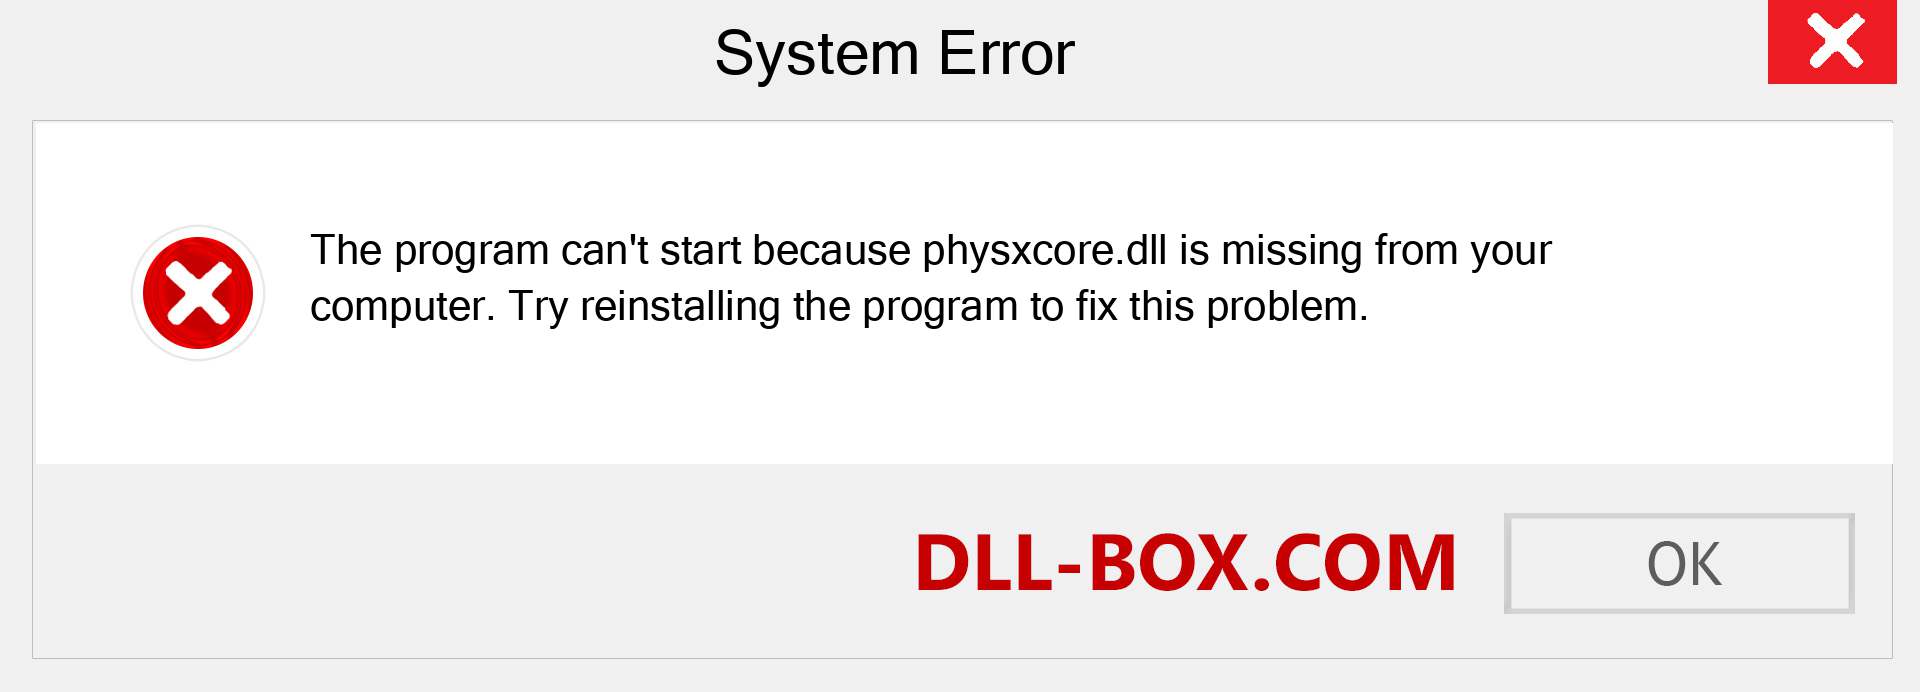  physxcore.dll file is missing?. Download for Windows 7, 8, 10 - Fix  physxcore dll Missing Error on Windows, photos, images